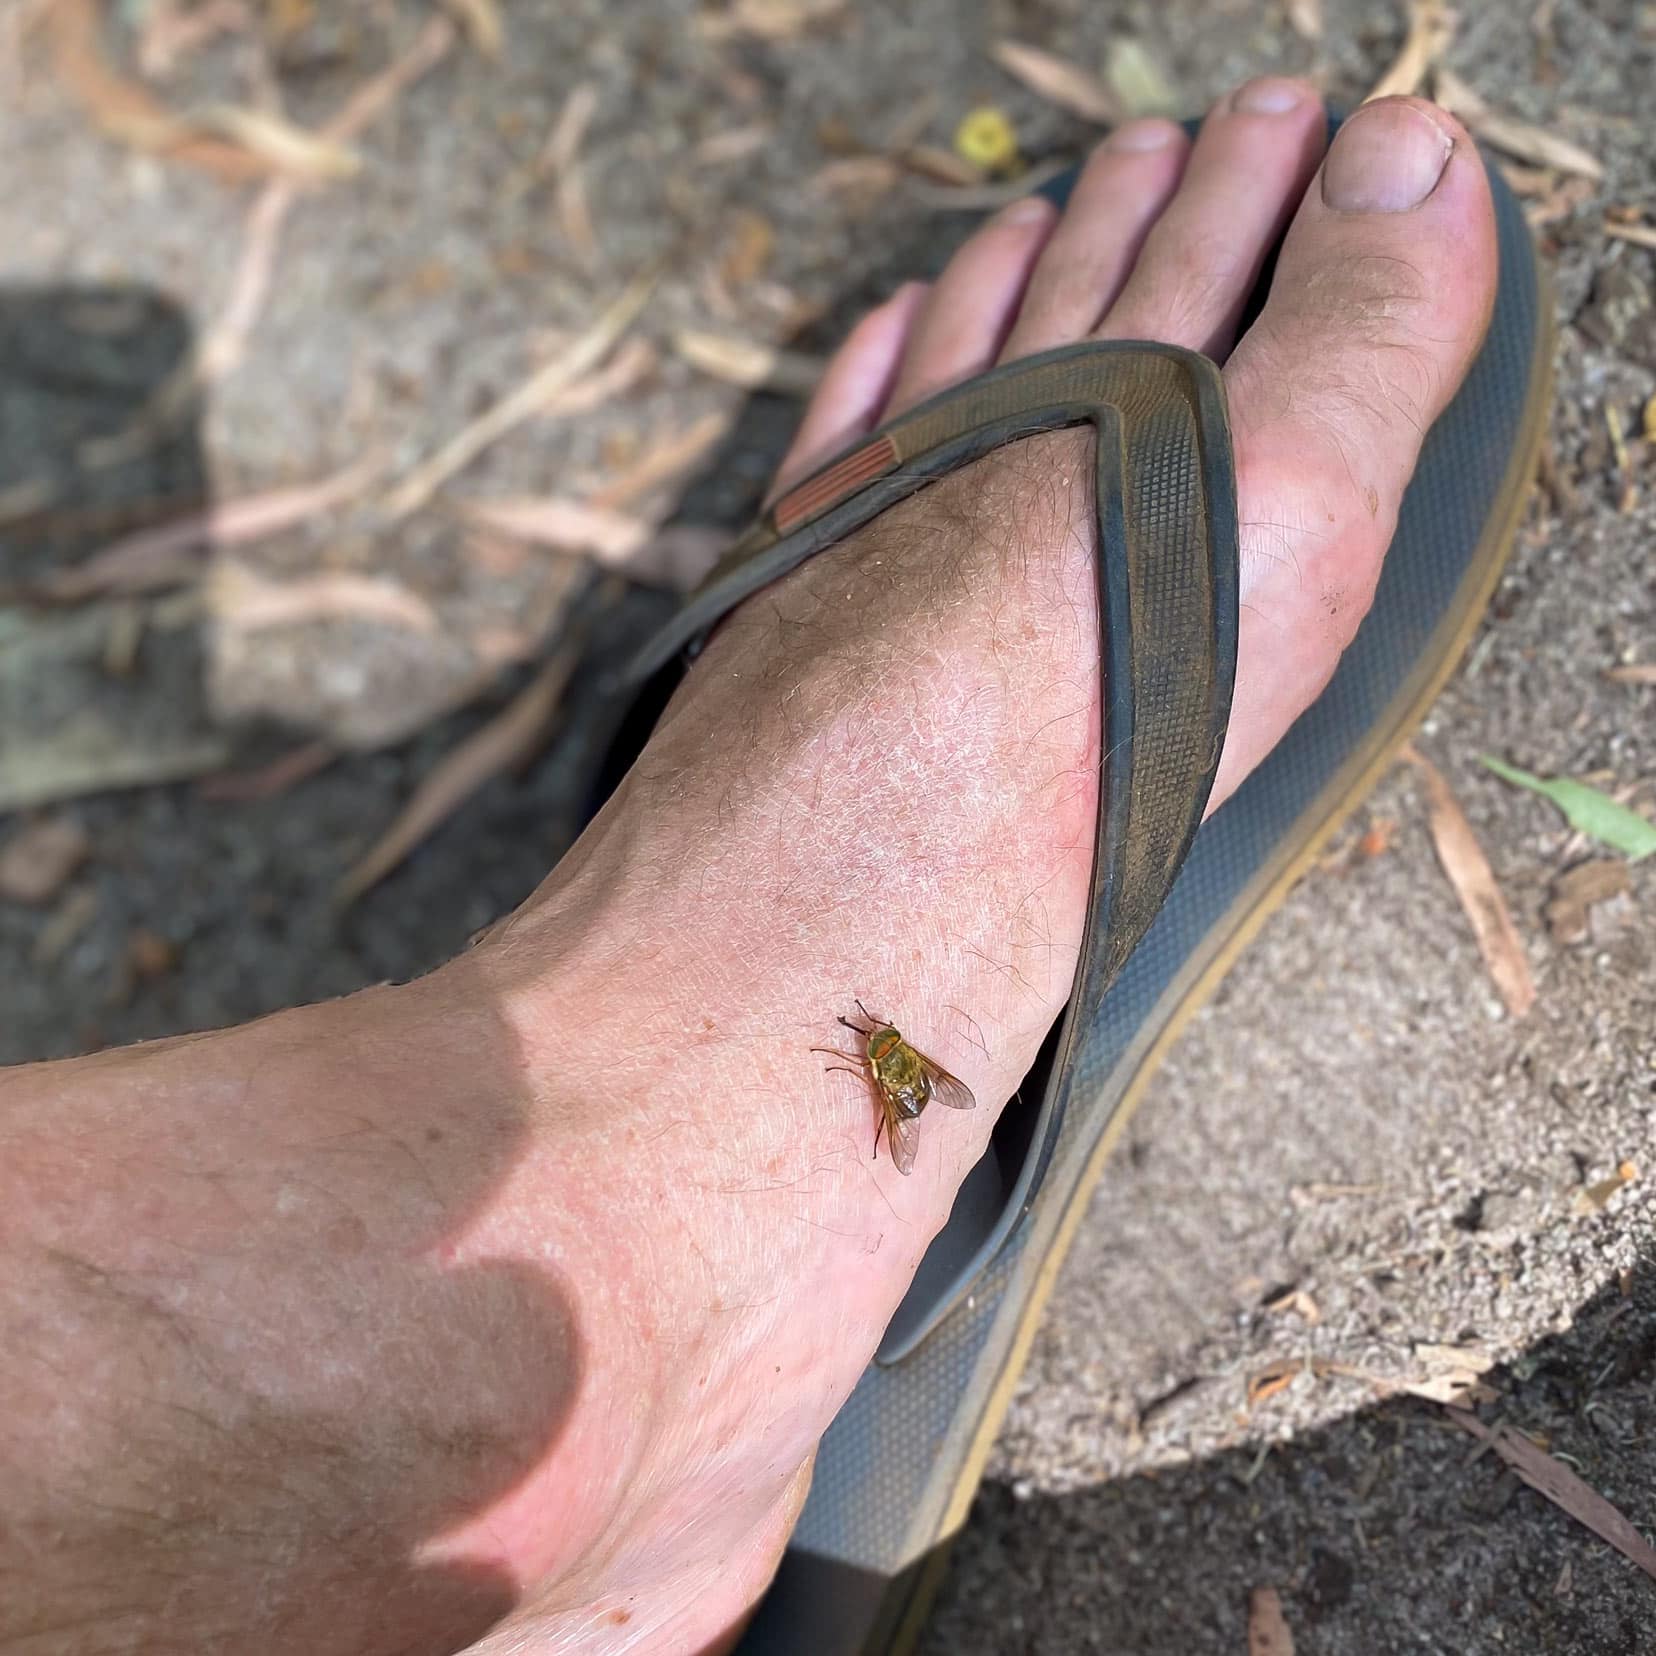 a horse fly or March fly on Lars foot 